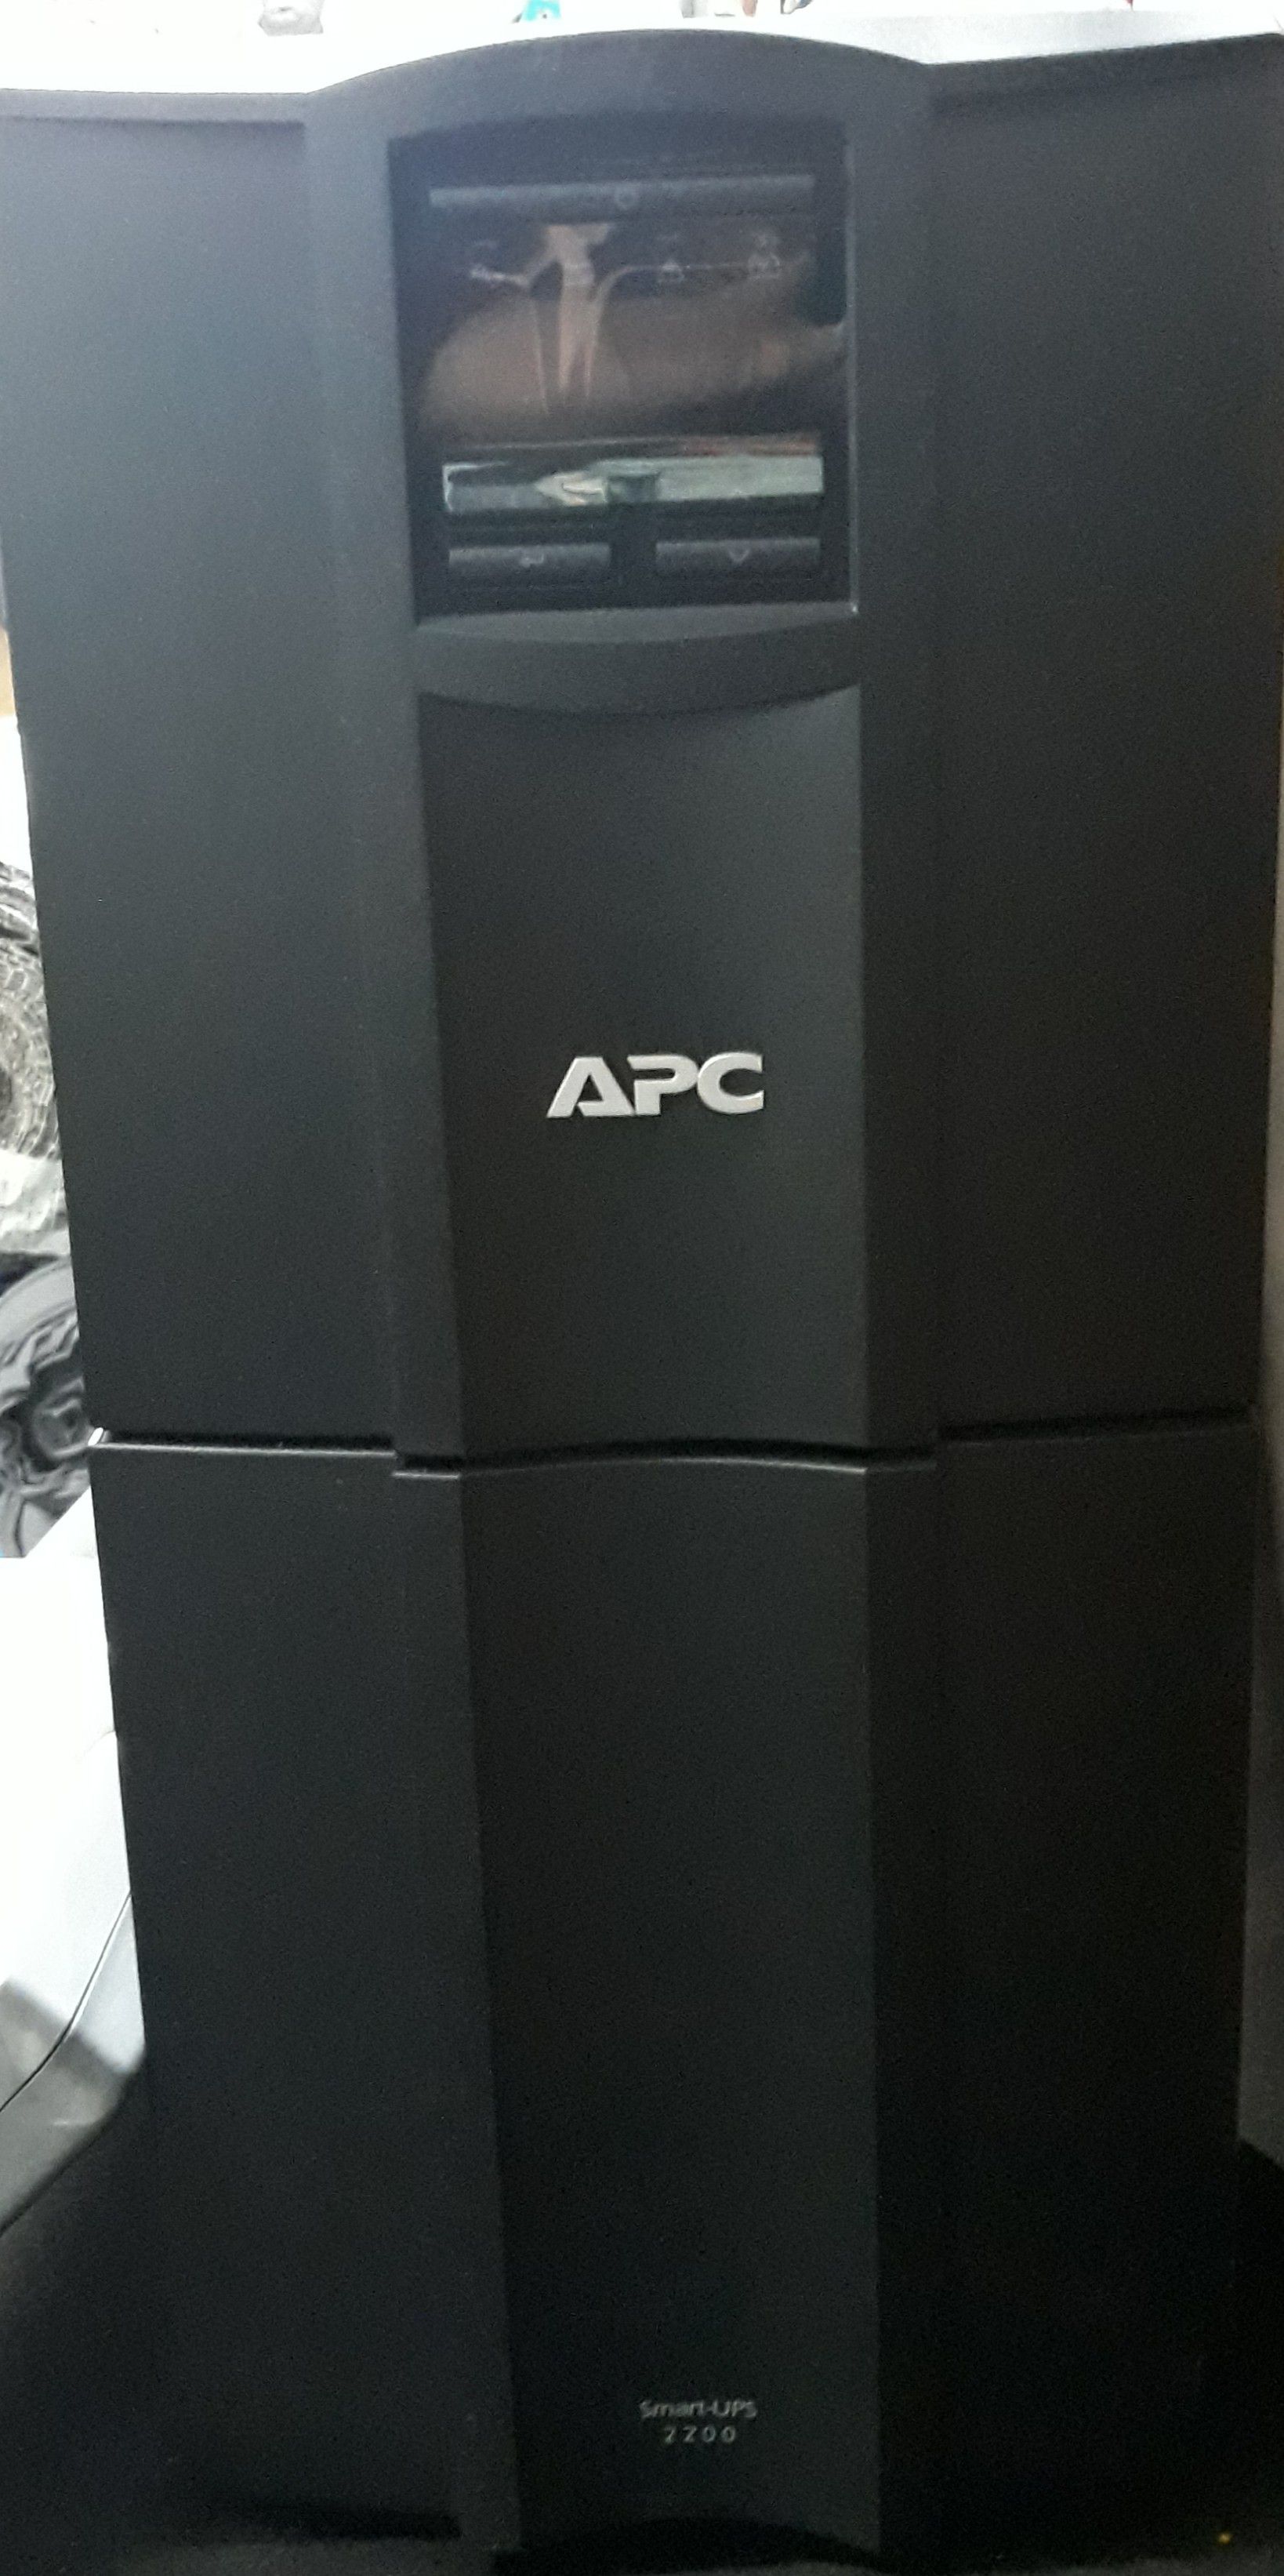 APC Smart-UPS 2200 for Sale in Los Angeles, CA - OfferUp